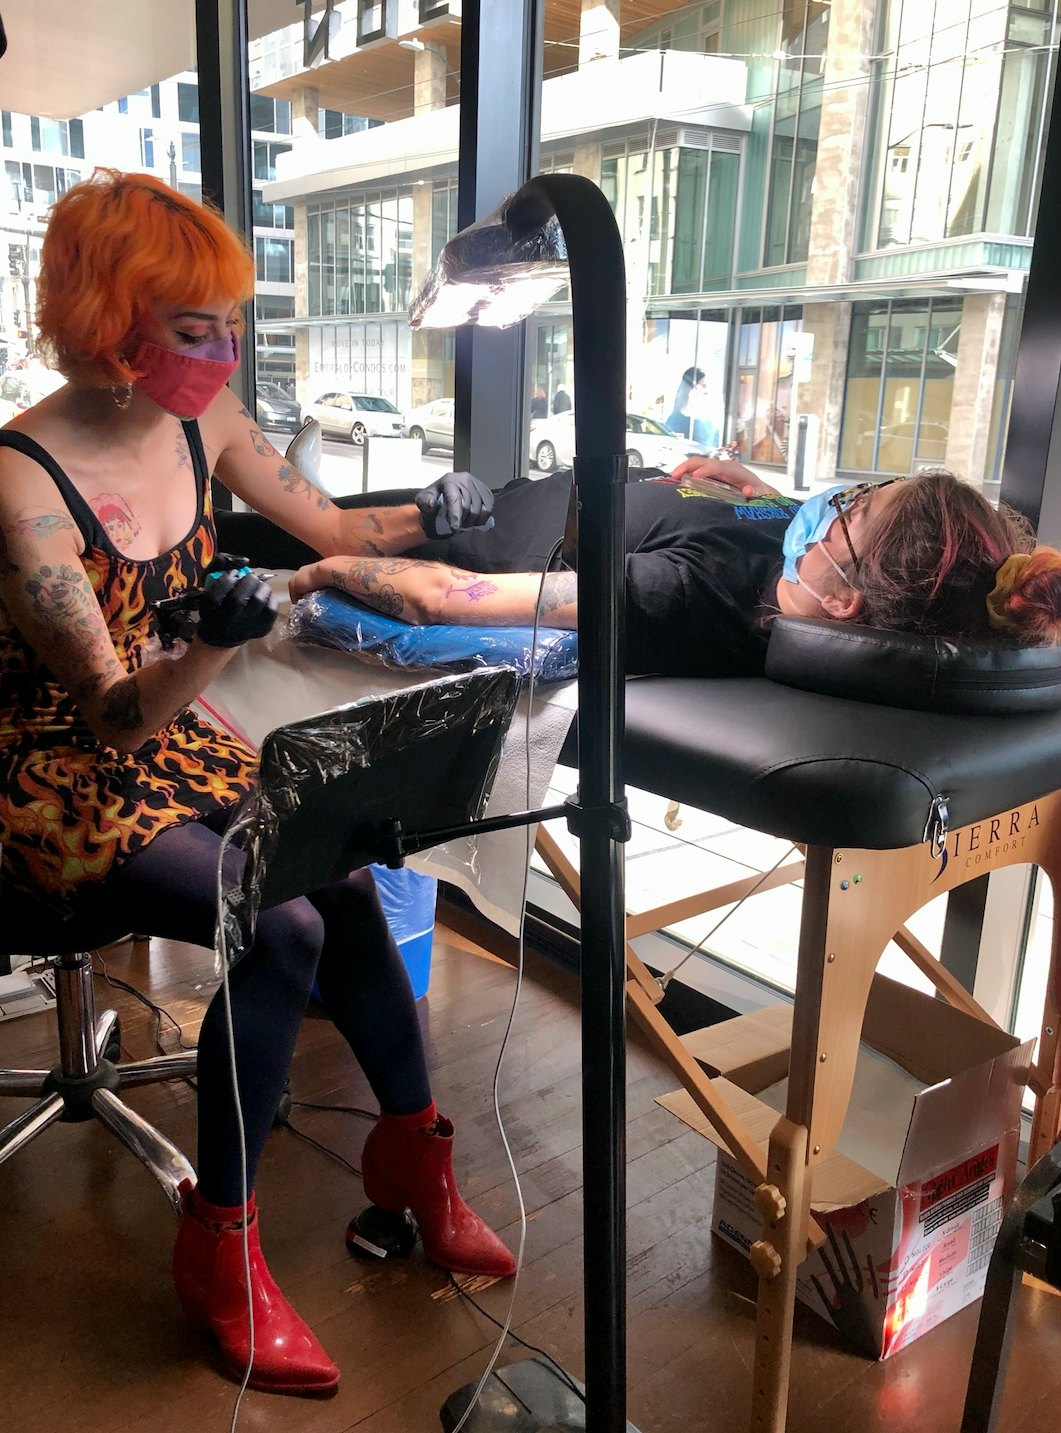 Famous local Seattle body artist Lolli (pictured) is currently a tattoo artist in residence at Thompson Seattle.